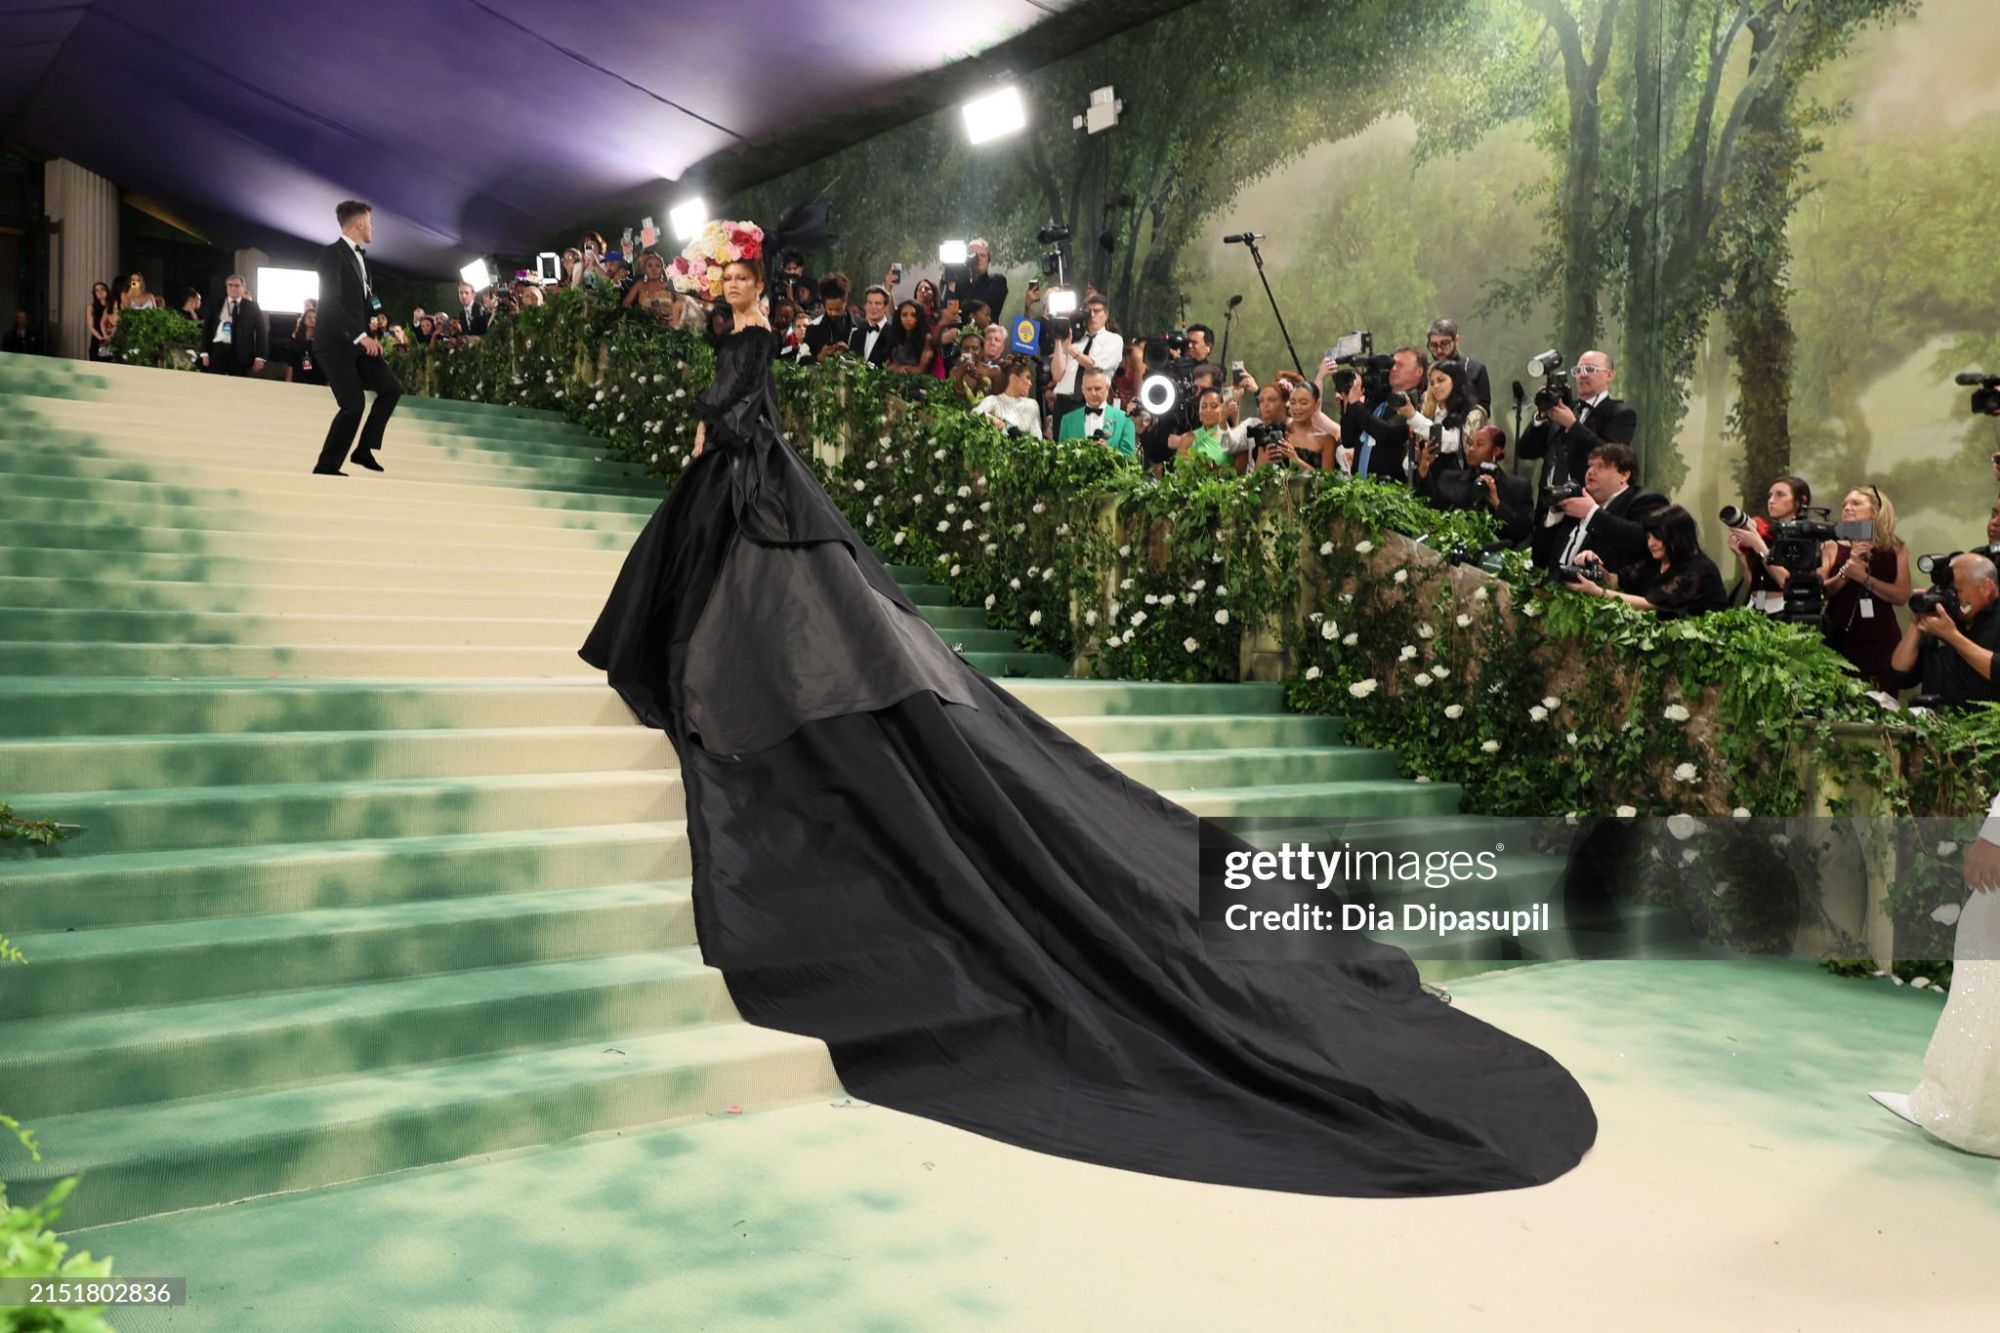 gettyimages-2151802836-2048x2048.jpg